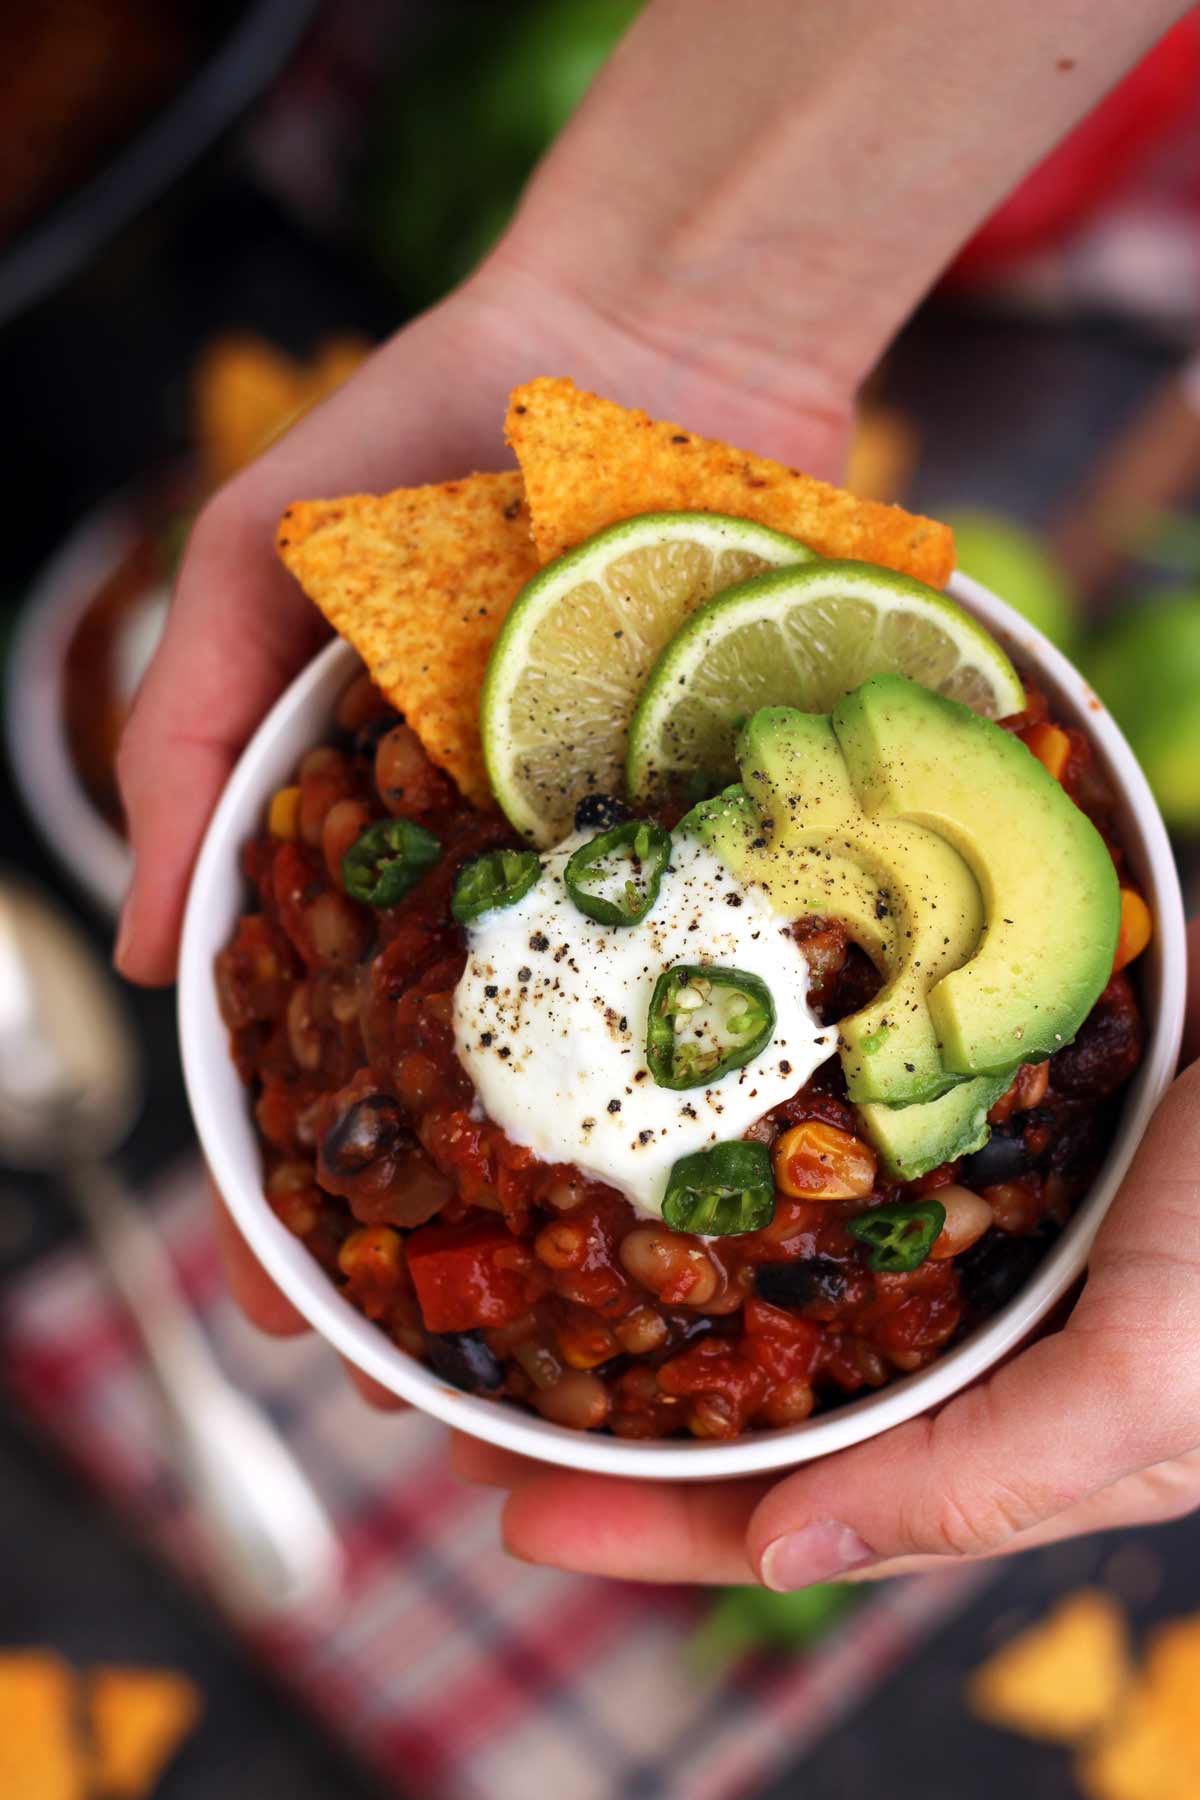 Hands Holding a Bowl of Vegan Chili